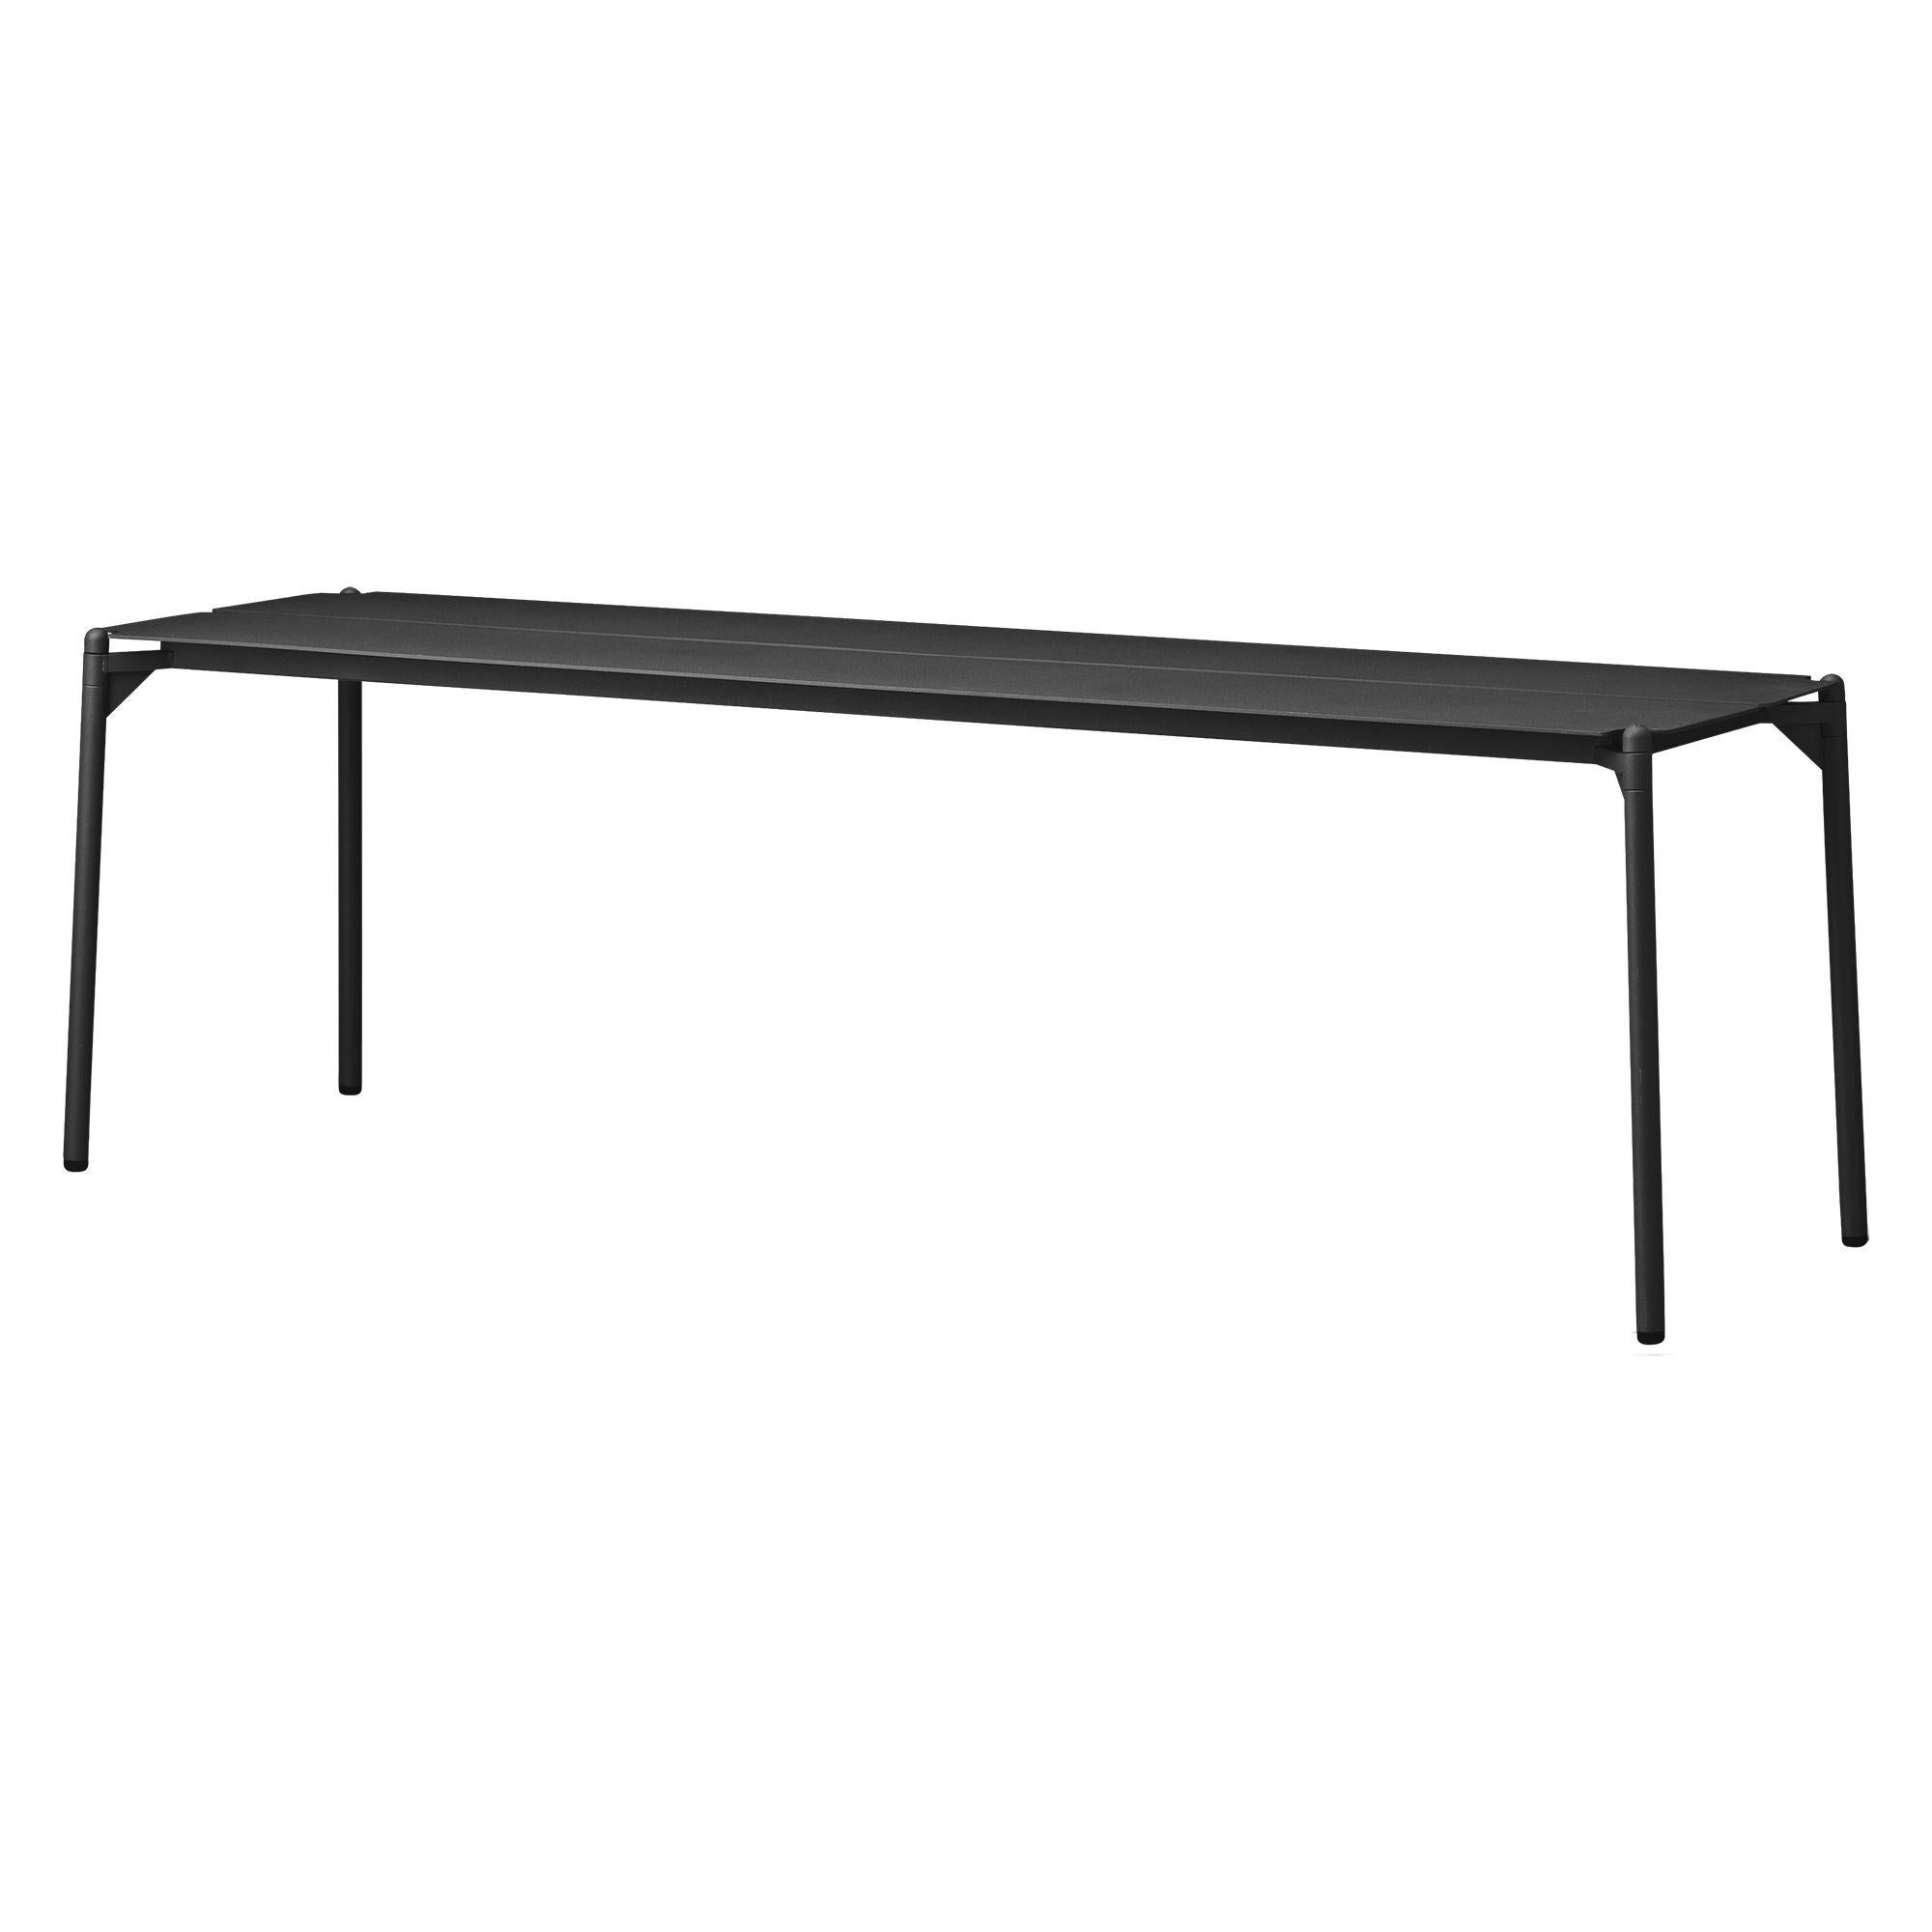 Black Minimalist bench
Dimensions: D 145 x W 43.3 x H 45.5 cm 
Materials: Steel w. Matte powder coating & aluminum w. Matte powder coating.
Available in colors: Taupe, bordeaux, forest, ginger bread, black and, black and gold.

With NOVO bench you